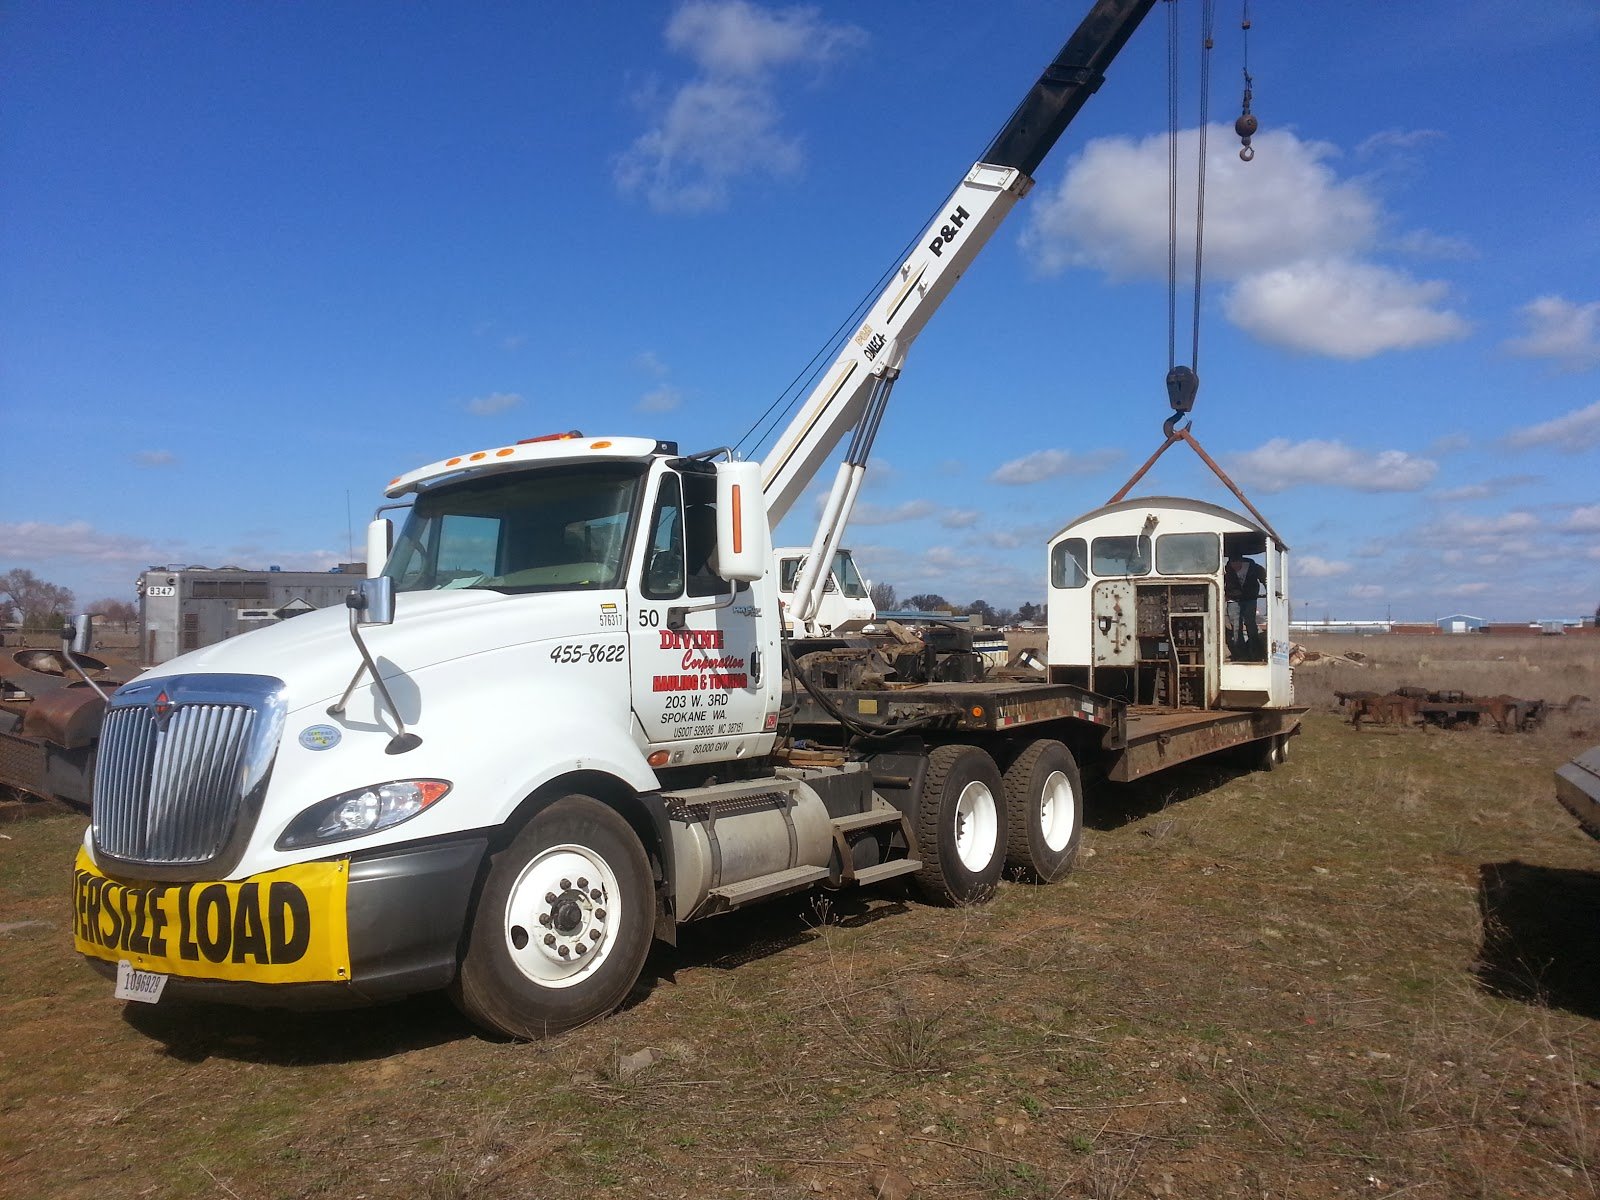 20130402 110825 - Towing, Recovery, and Hauling